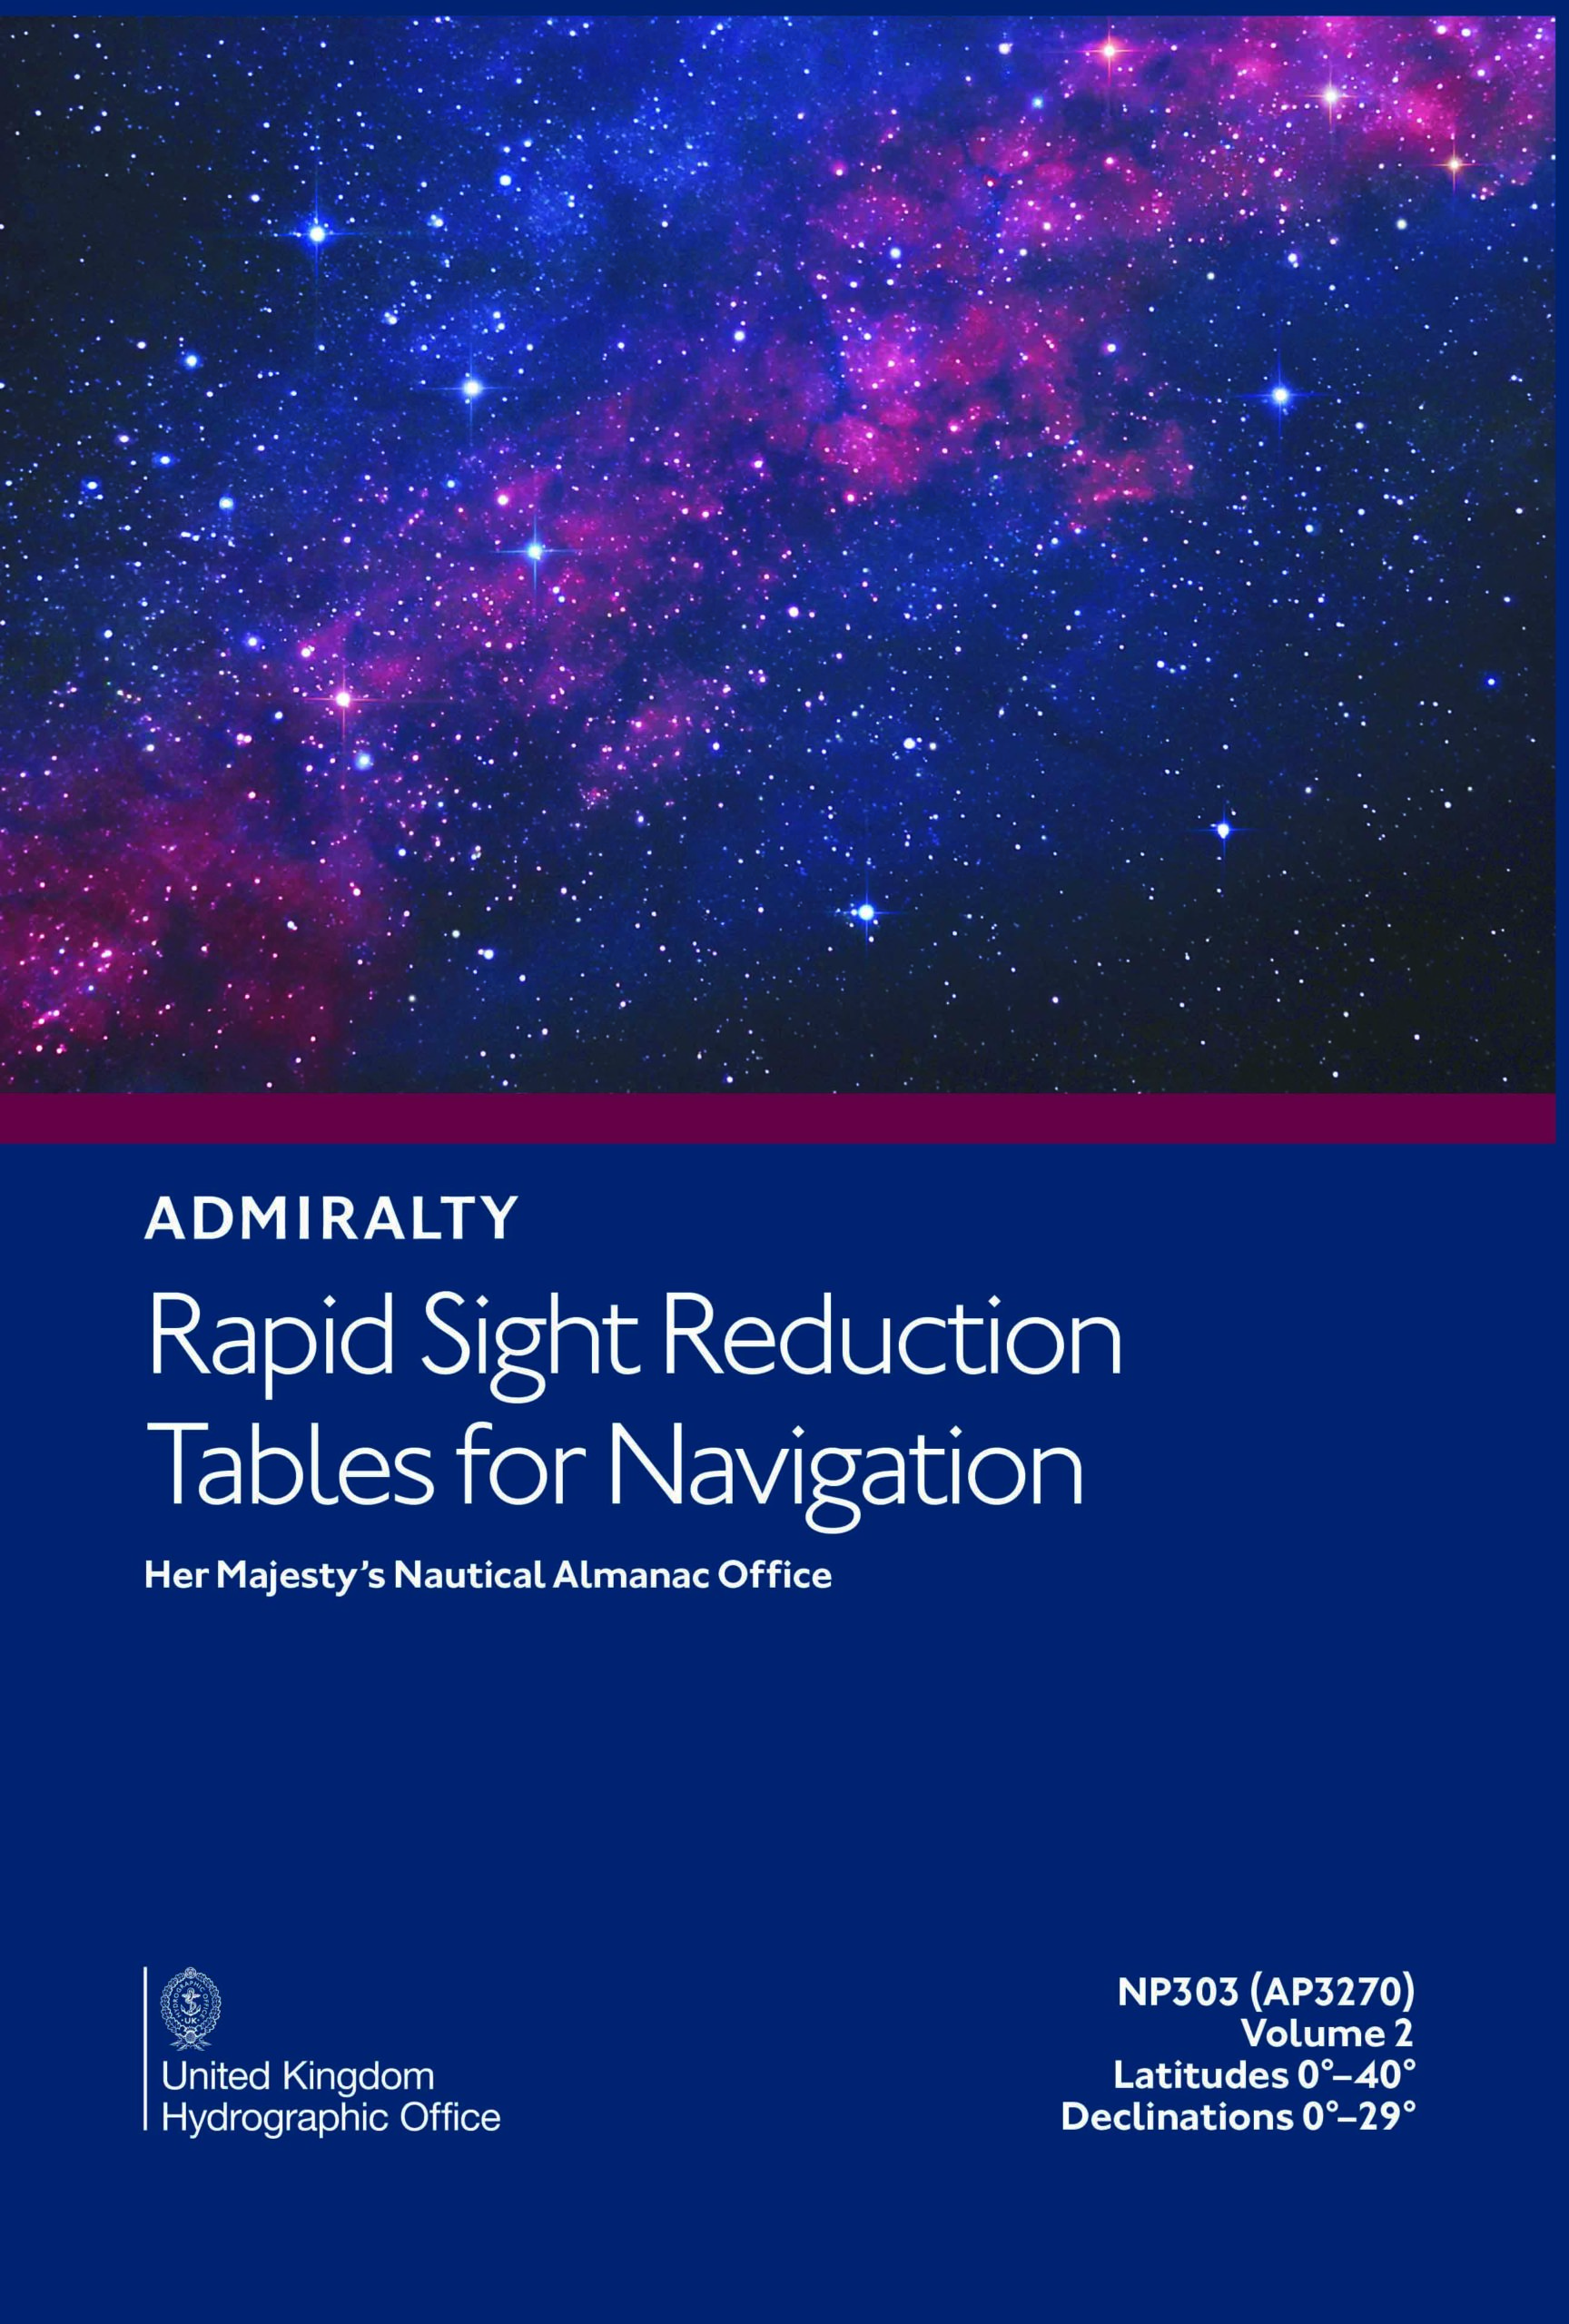 NP303 – Admiralty Rapid Sight Reduction Tables for Navigation Vol 2